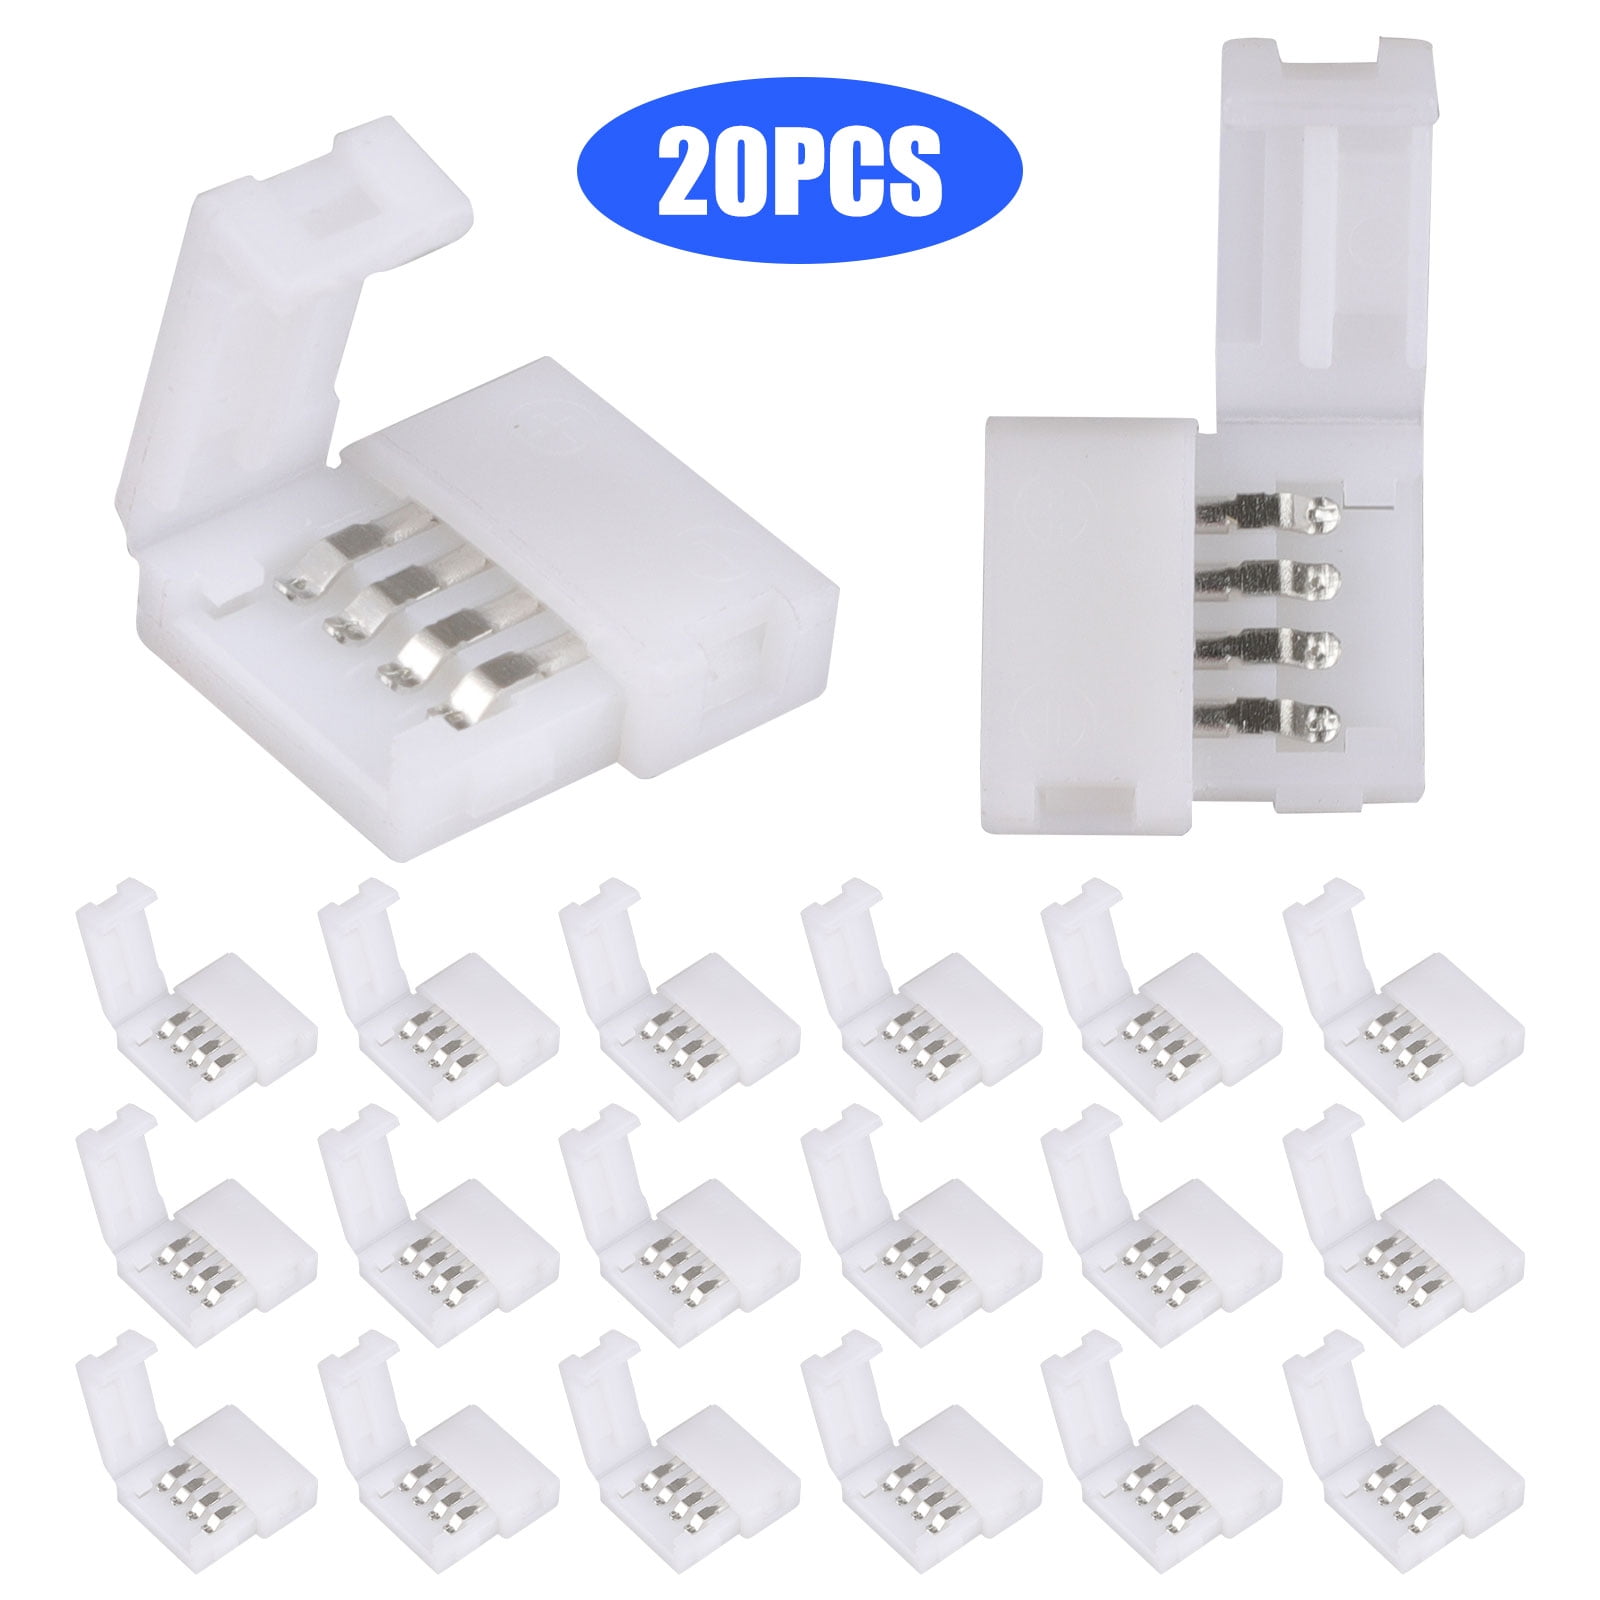 - MOUNTING Clip Hardware for LED Strip 5m 10m 3528 5050 SMD Waterproof 20PCS 